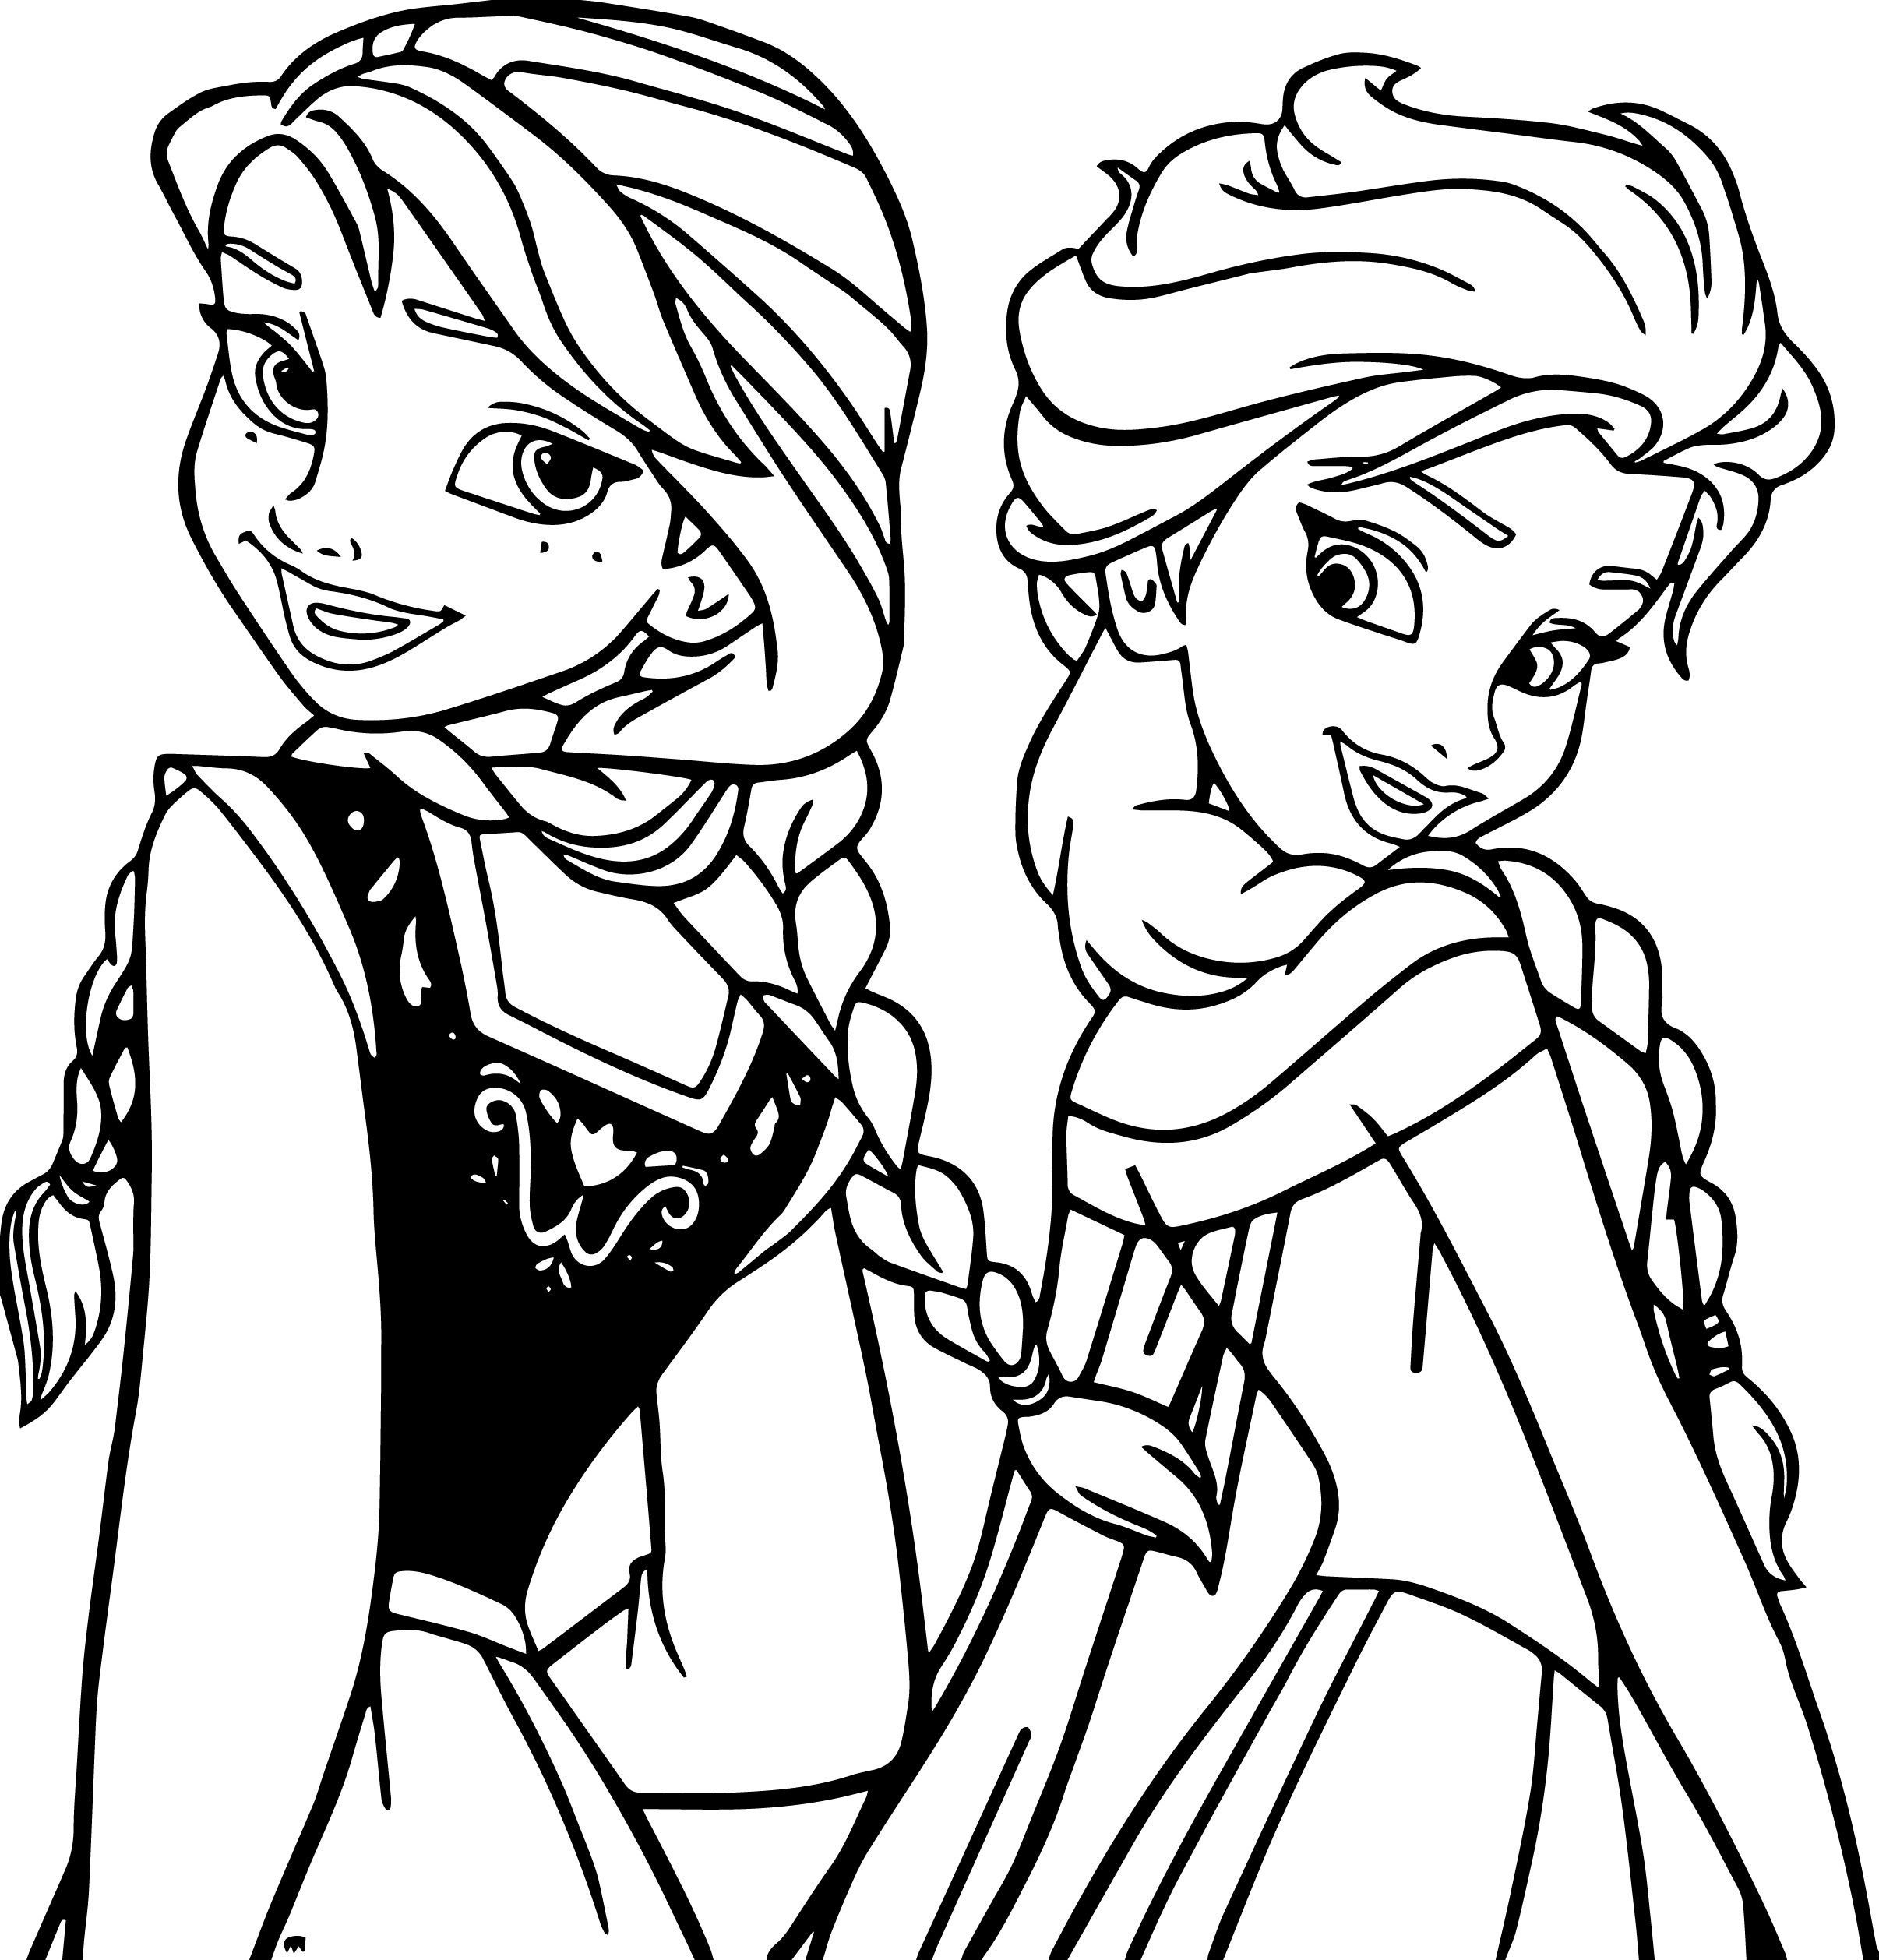 Coloring Book : Free Frozen Coloring Pages Incredible Anna ...